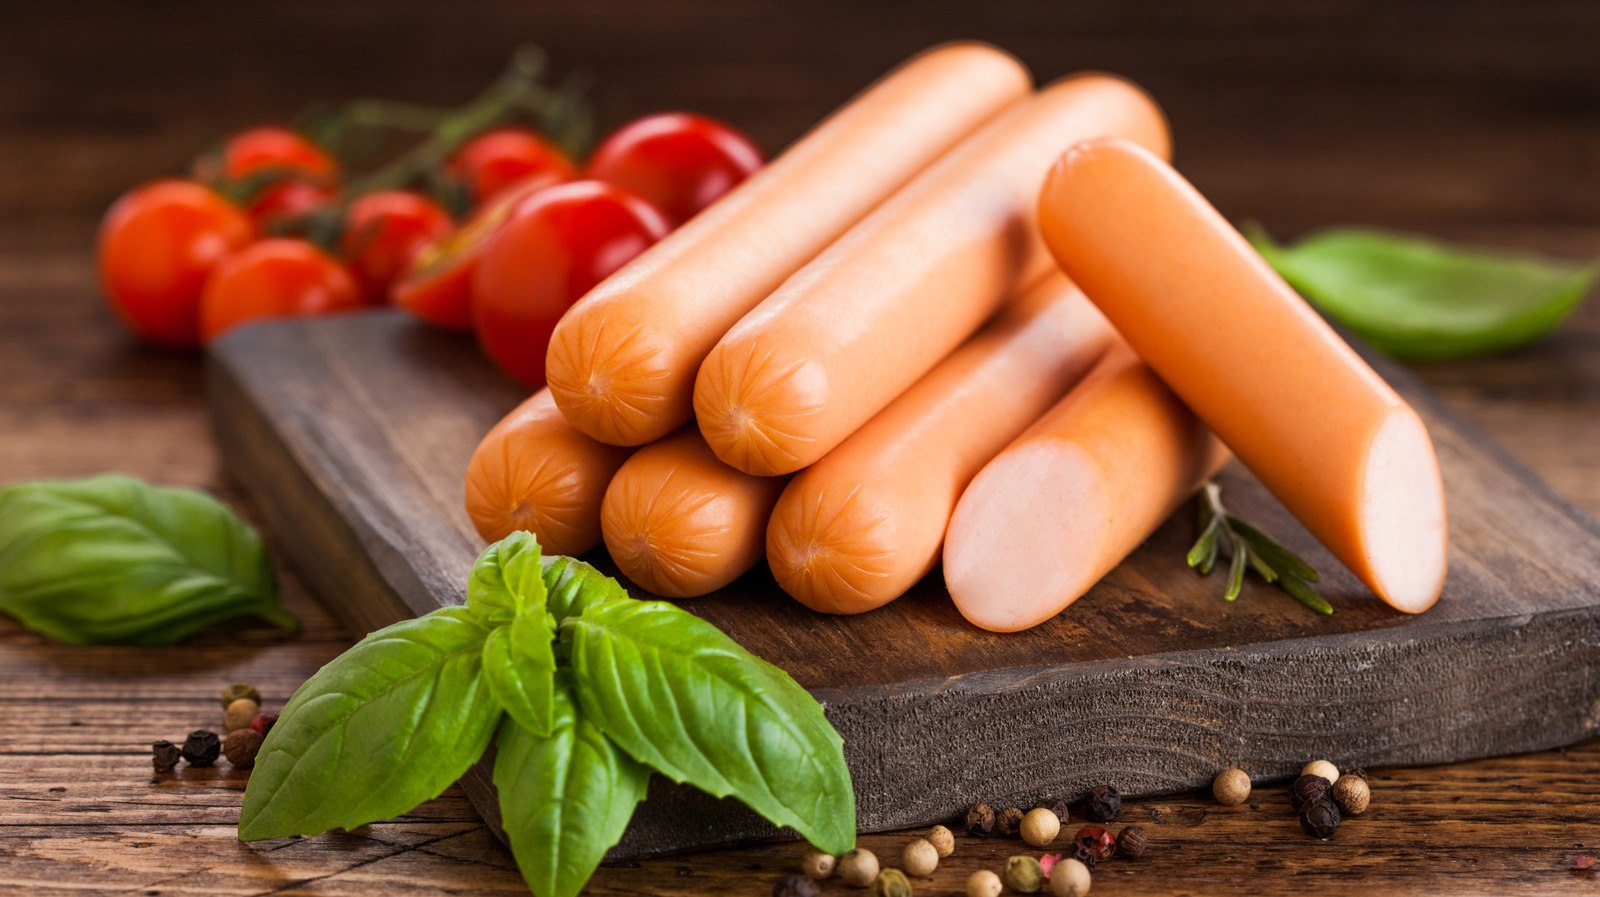 12 Different Ways To Cook Hot Dogs